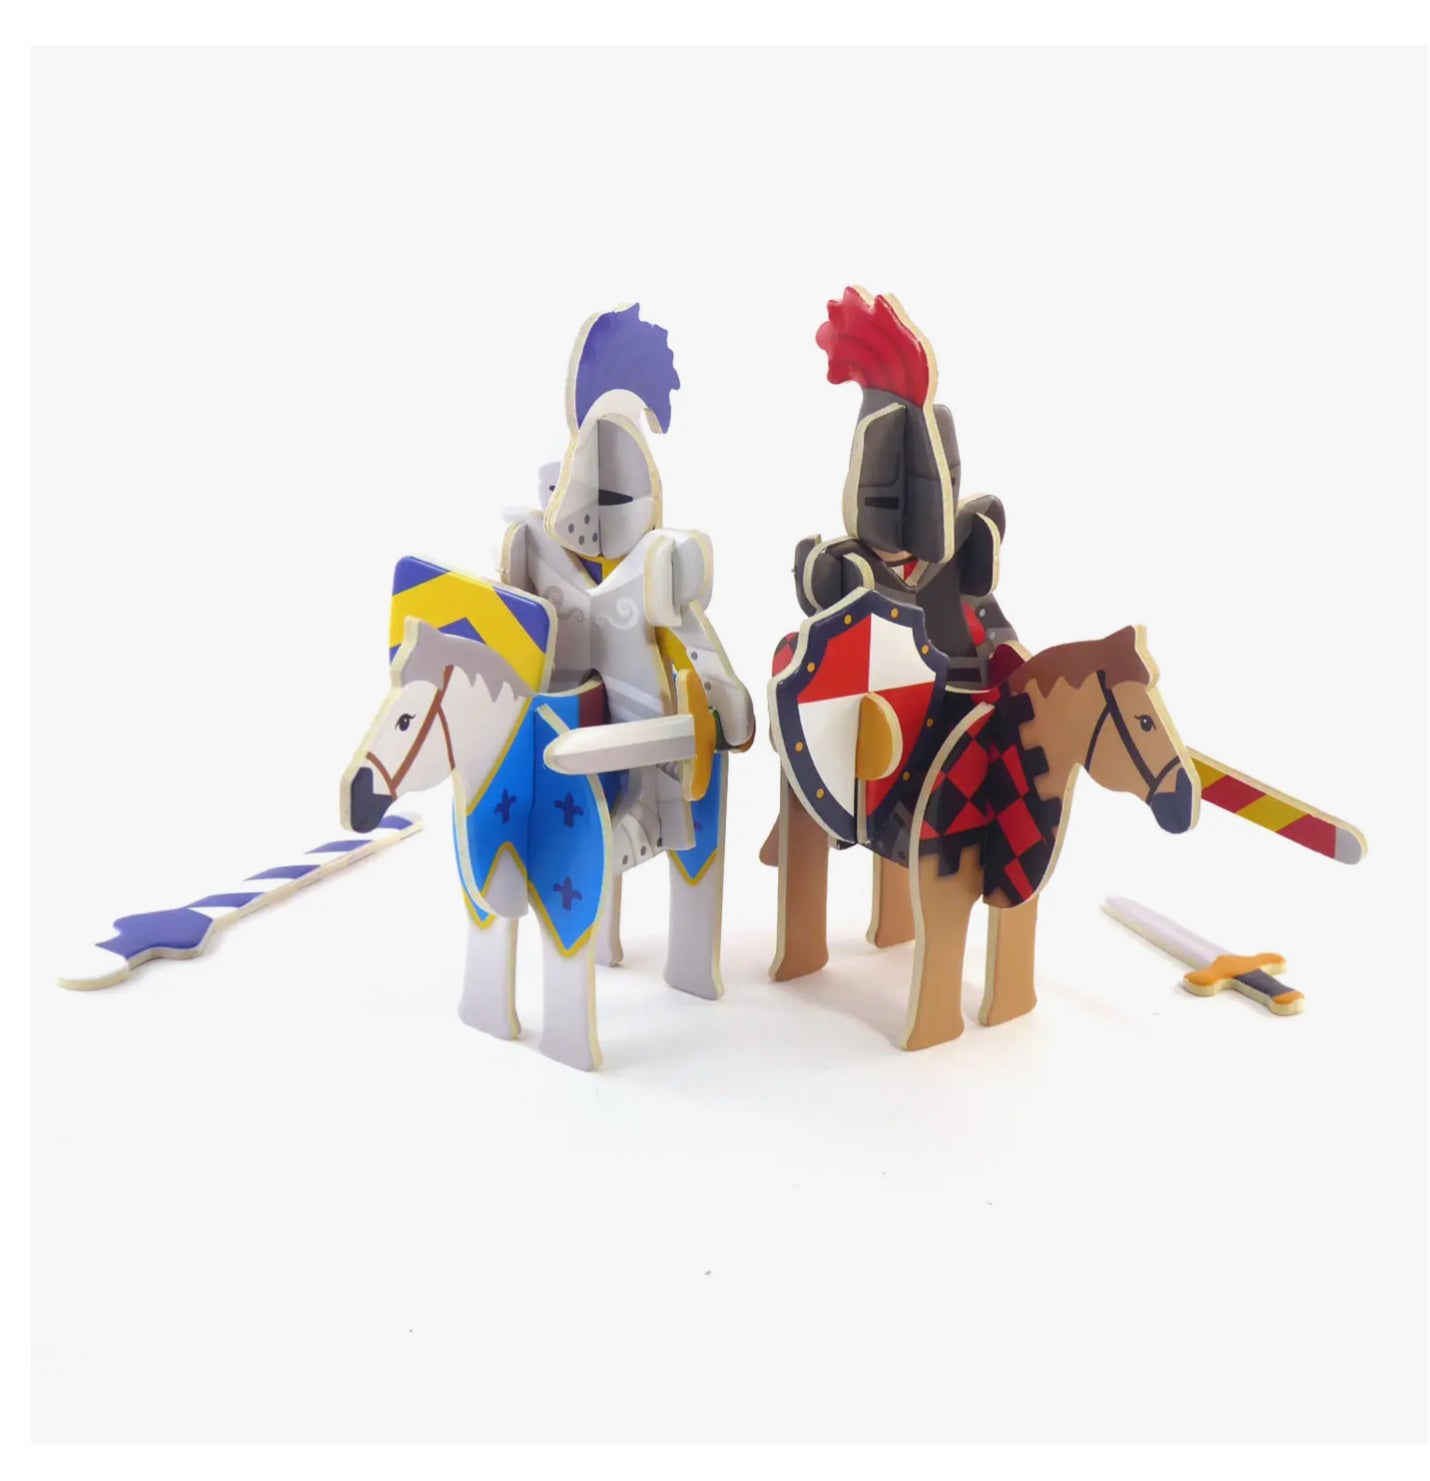 Knights & Castle Pop-out Playpress Playset